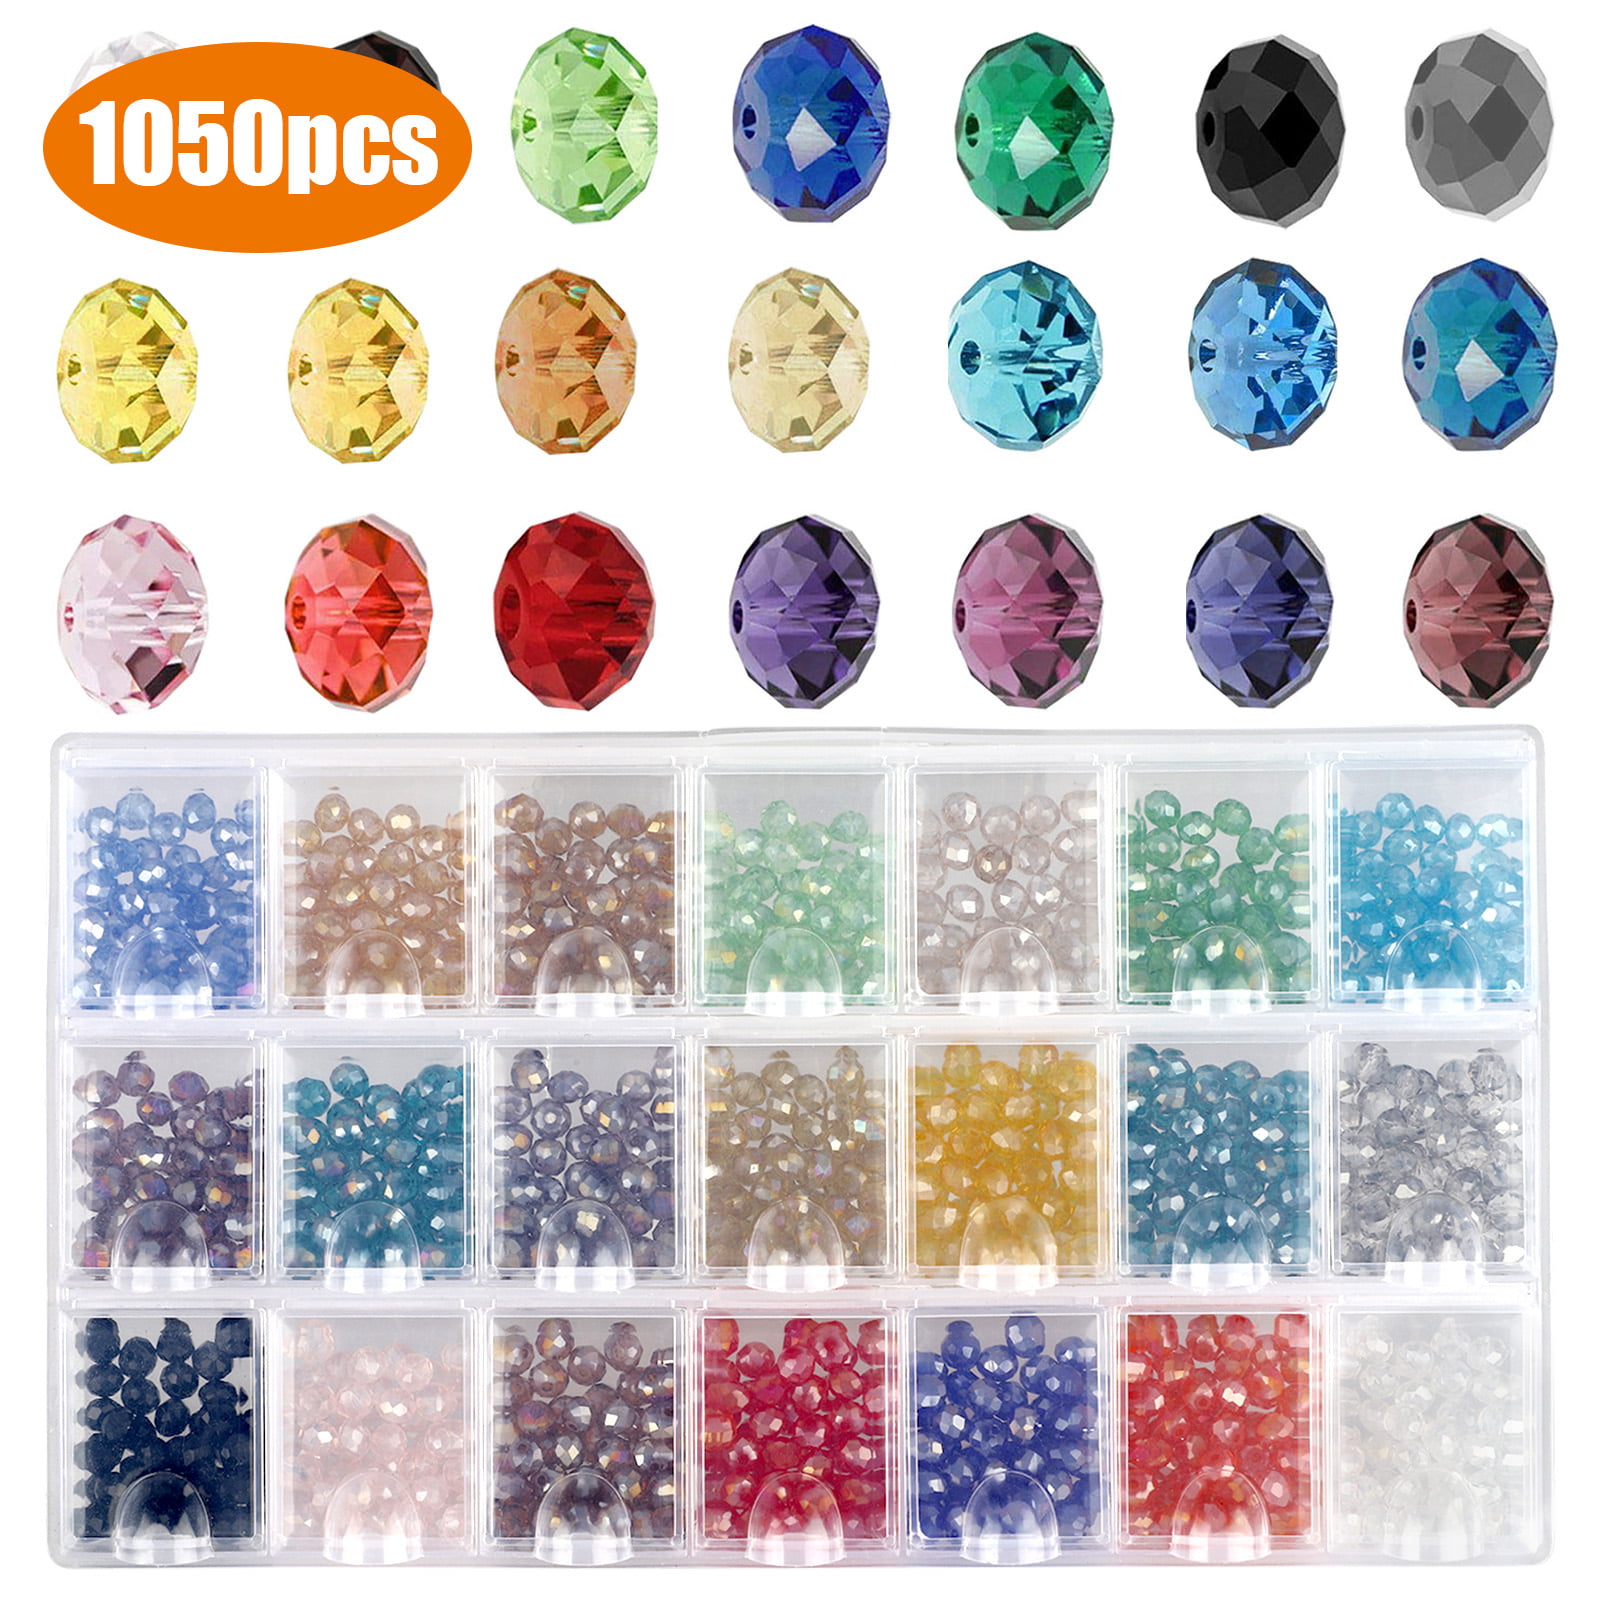 400Pcs Wholesale Spacer Beads Round Ball Metal Round Beads Jewelry Making Crafts